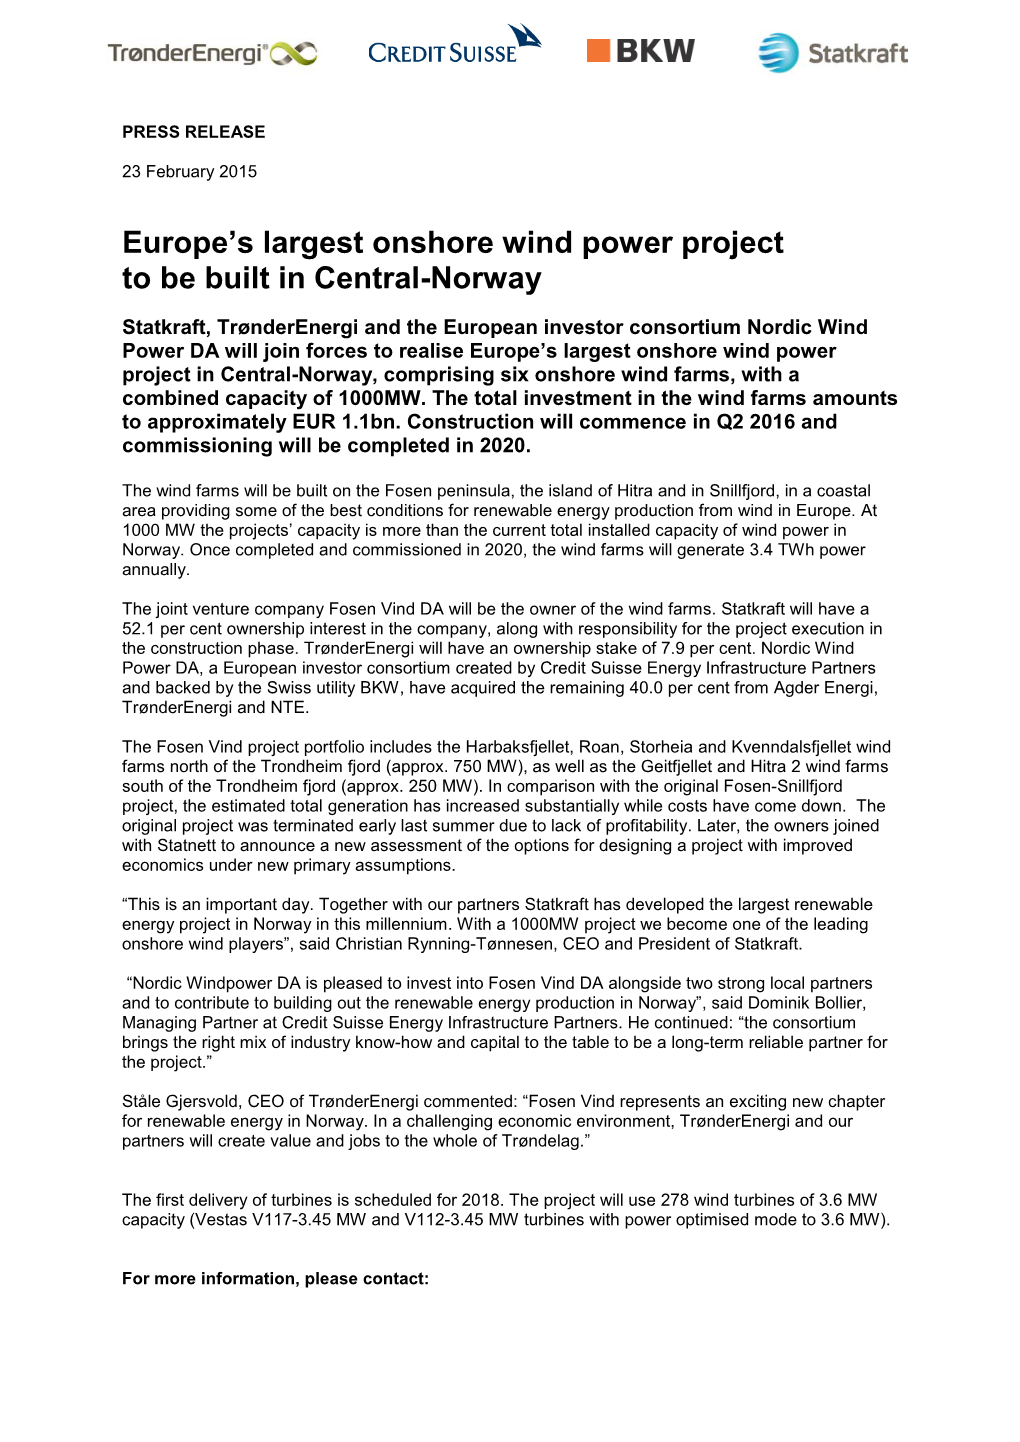 Europe's Largest Onshore Wind Power Project to Be Built in Central-Norway